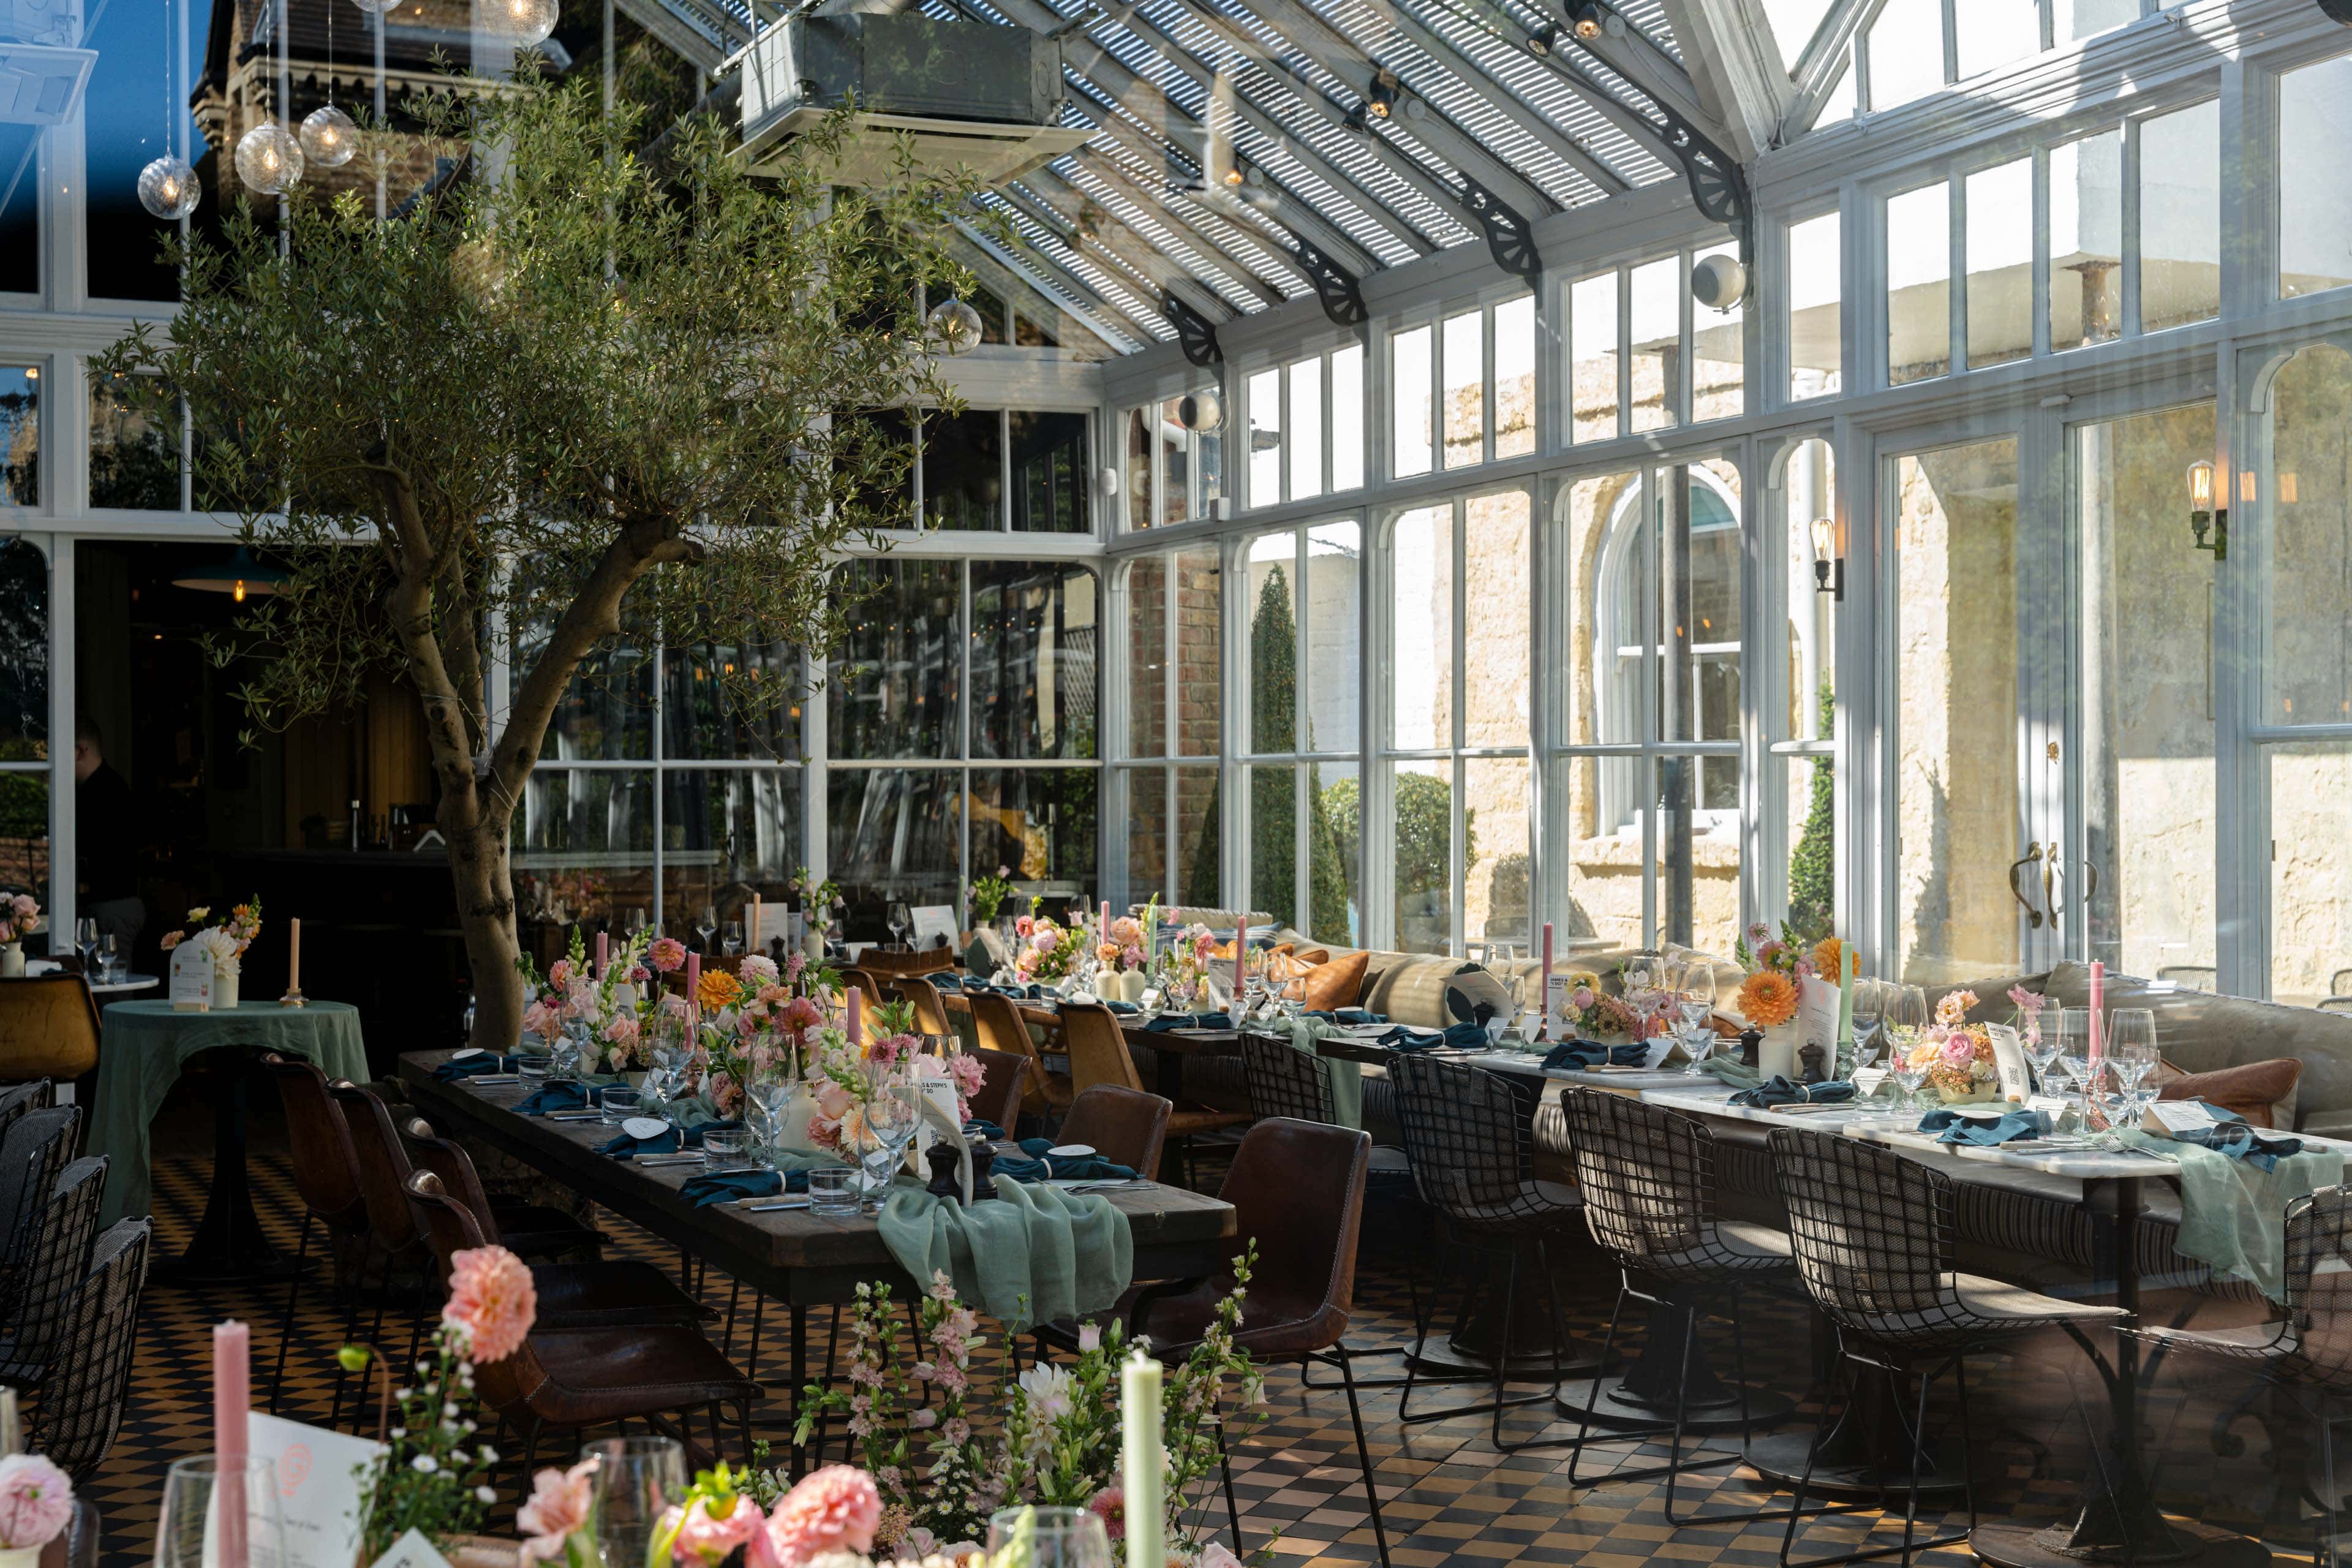 A7R08941 - 2023 - Gees Restaurant & Bar - Oxford - High Res - Wedding Glasshouse Exclusive Use Flowers - Web Hero